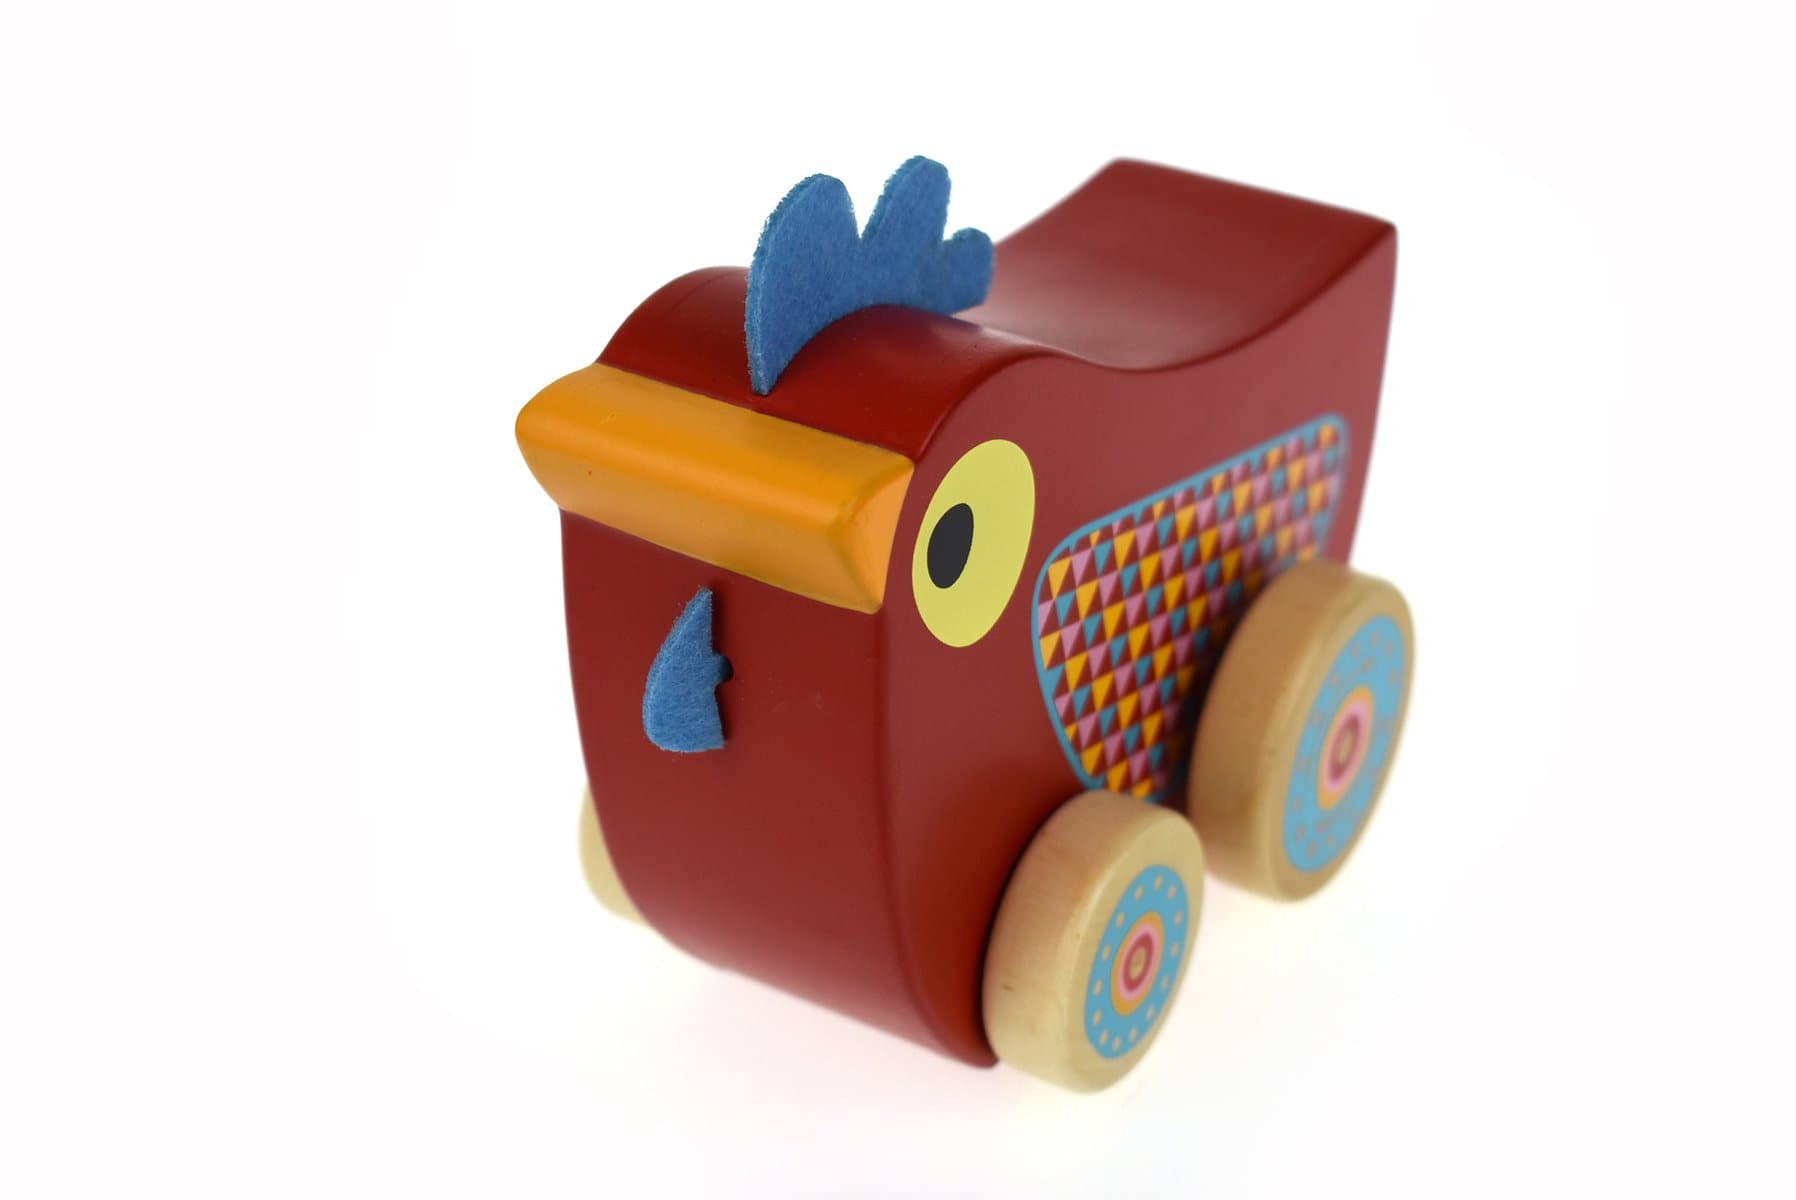 toys for infant Chicken Wind N Walk Music Box